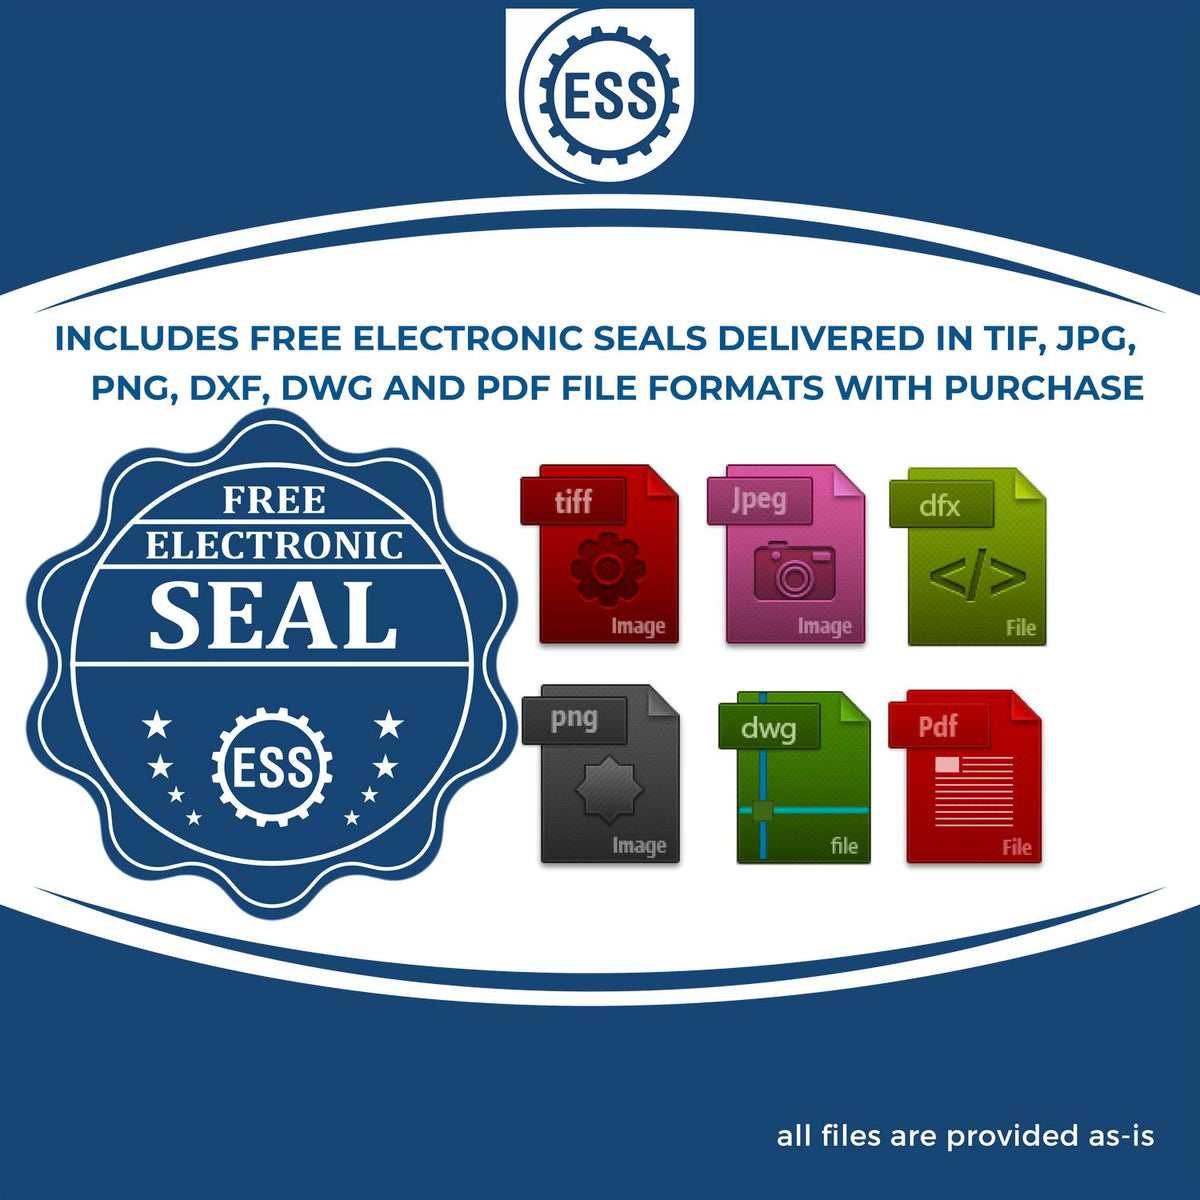 An infographic for the free electronic seal for the State of Delaware Long Reach Architectural Embossing Seal illustrating the different file type icons such as DXF, DWG, TIF, JPG and PNG.